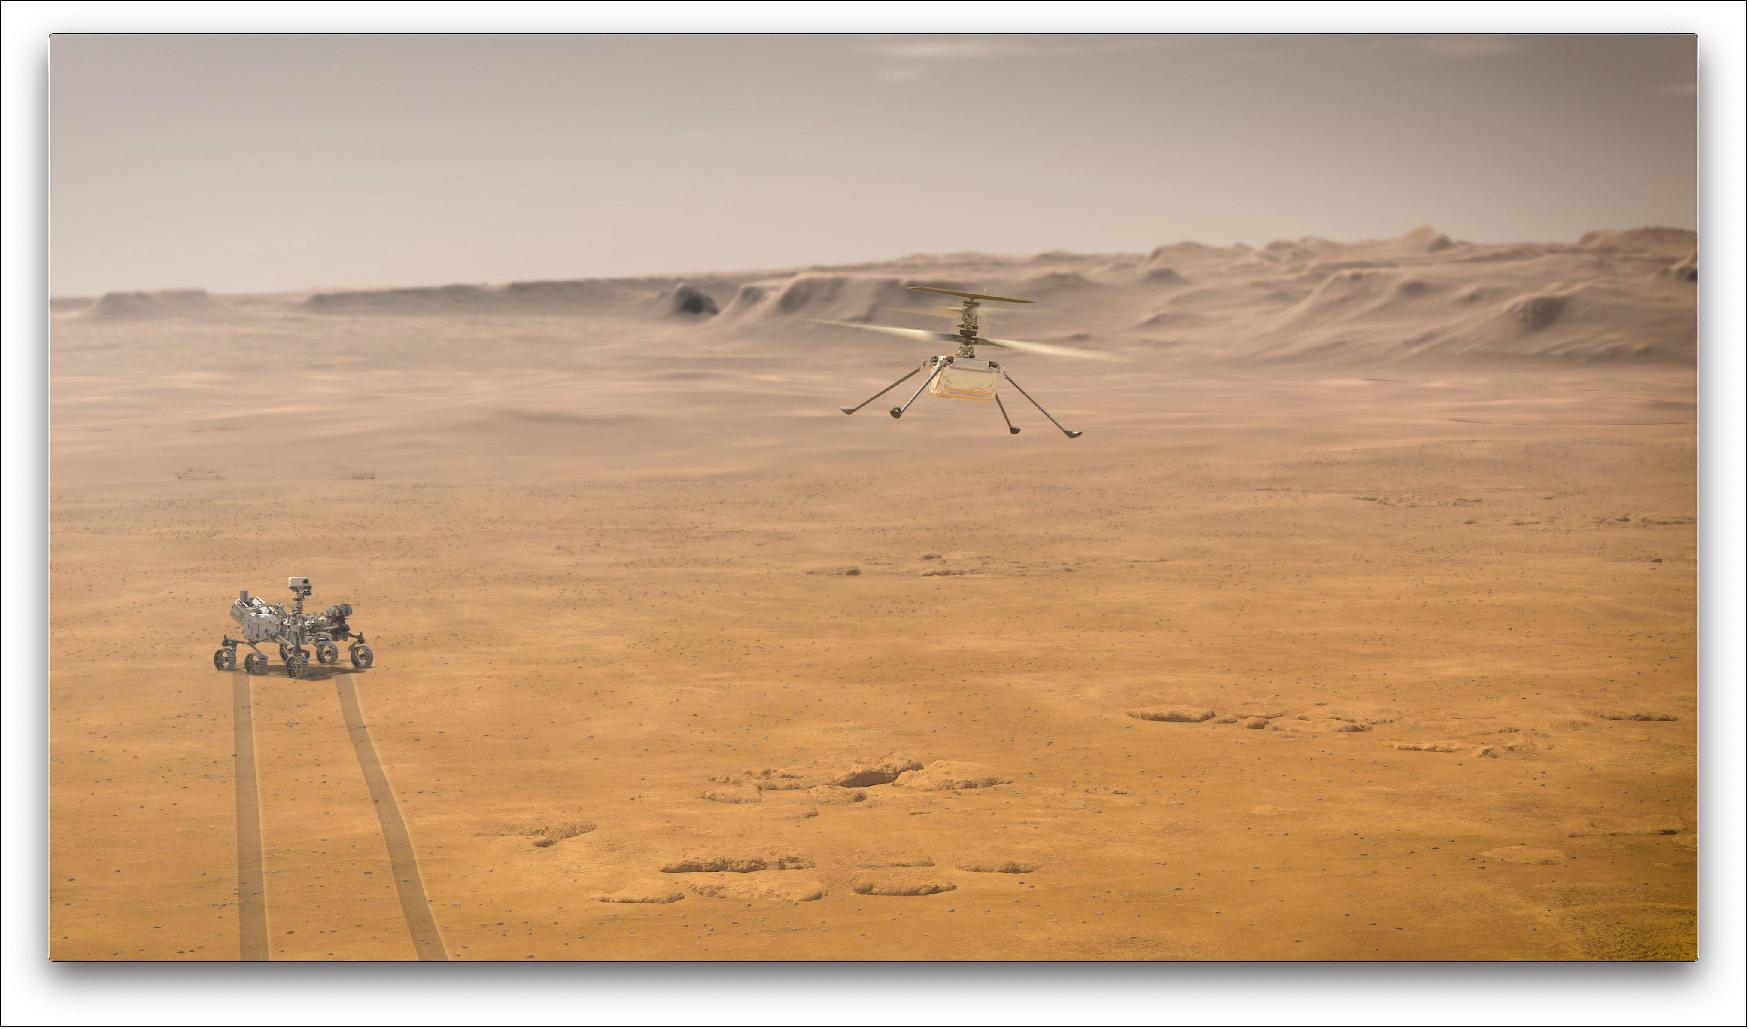 Figure 2: When NASA's Ingenuity Mars Helicopter attempts its first test flight on the Red Planet, the agency's Mars 2020 Perseverance rover will be close by, as seen in this artist's concept (image credit: NASA/JPL-Caltech)